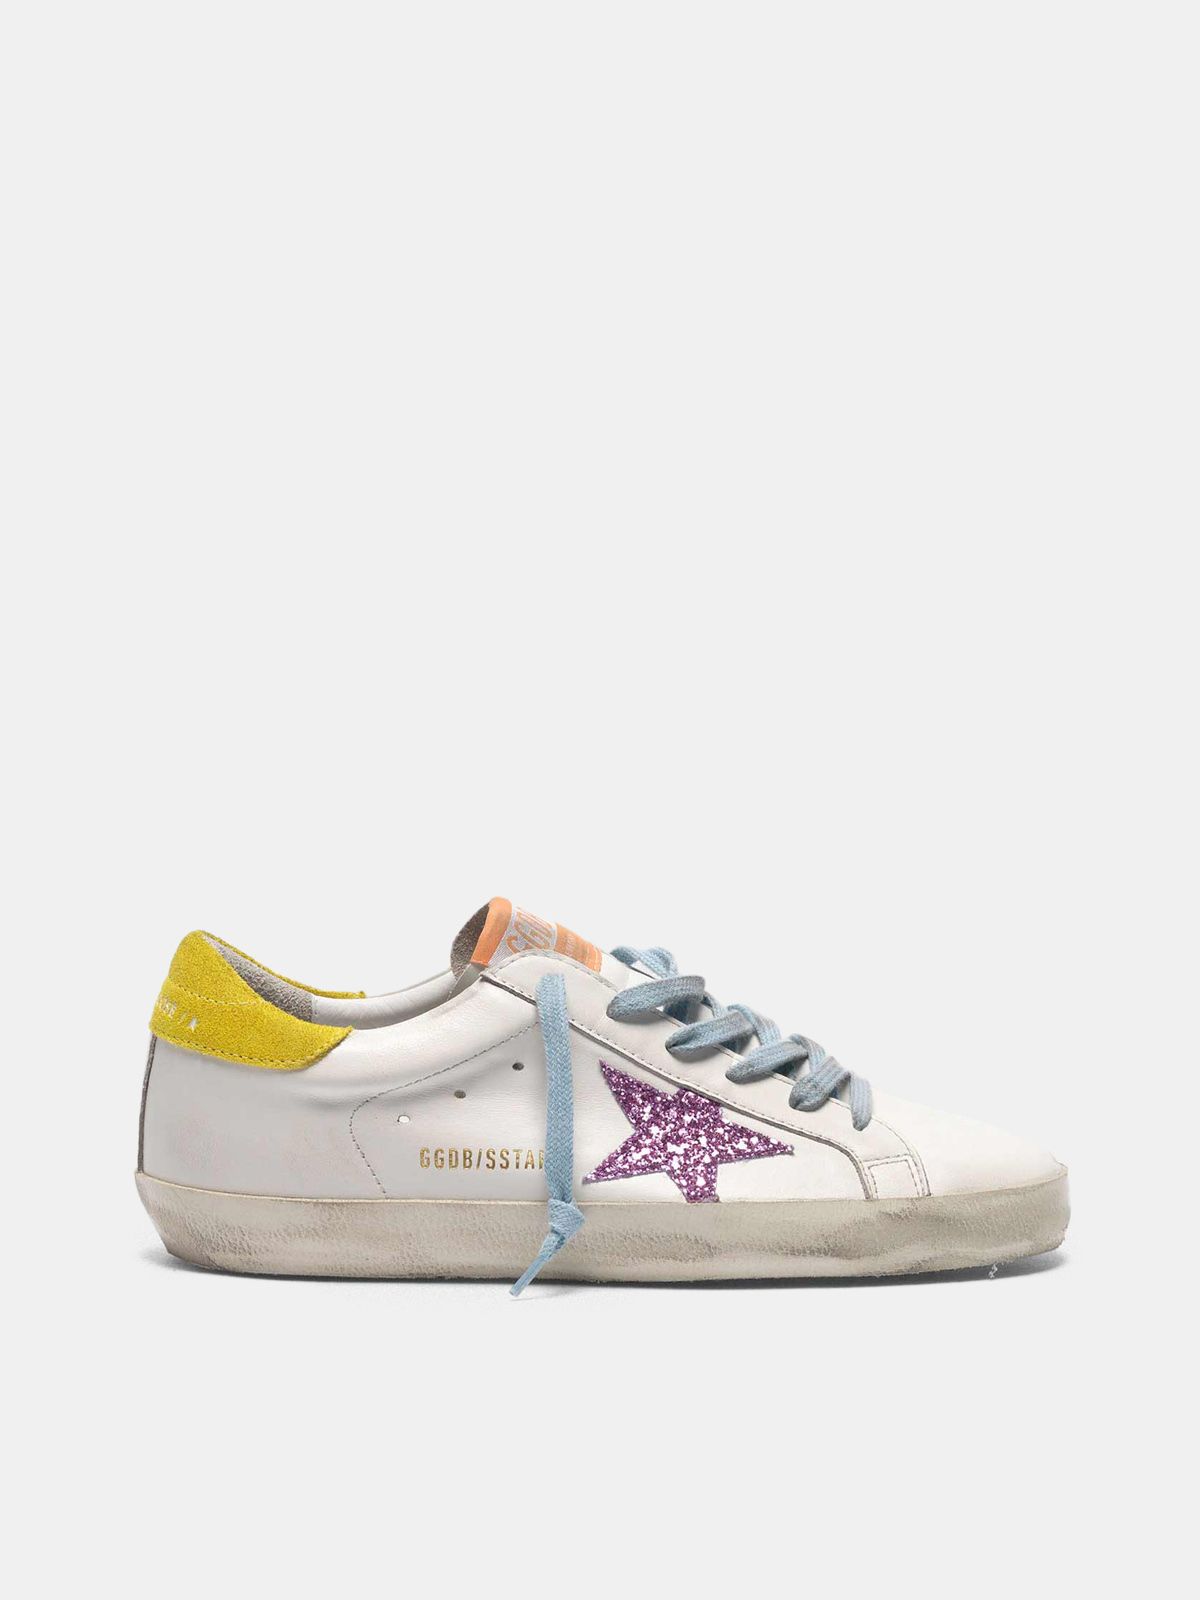 golden goose glittery with star heel Super-Star sneakers pink tab yellow and